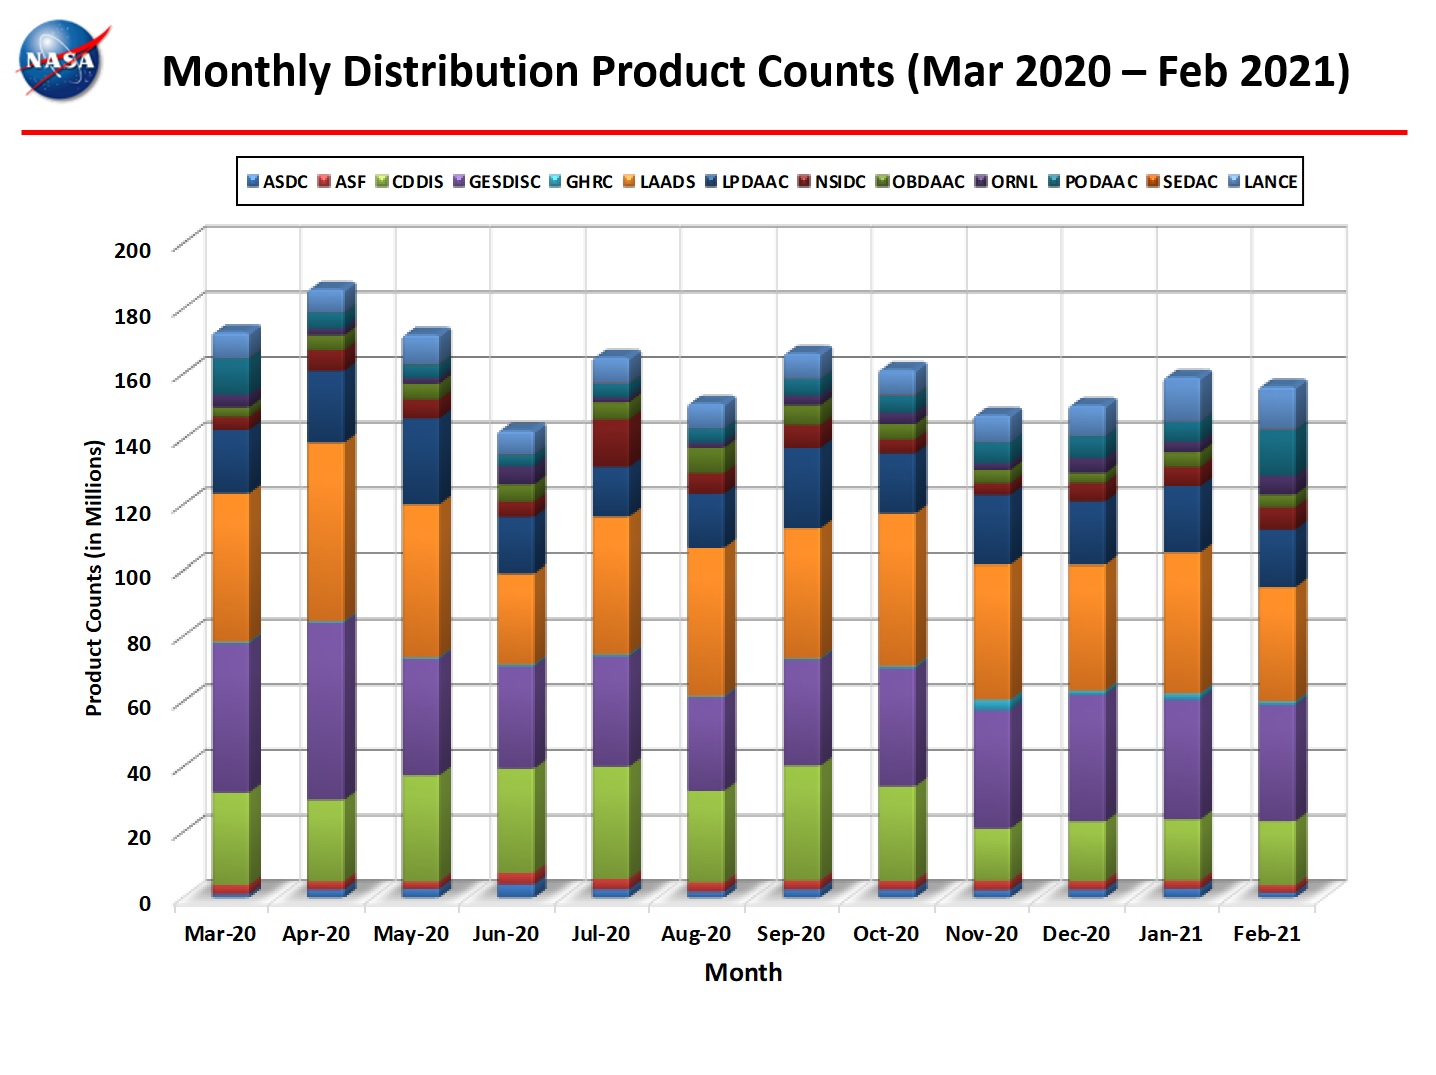 Monthly Distro Product Counts 1-2021